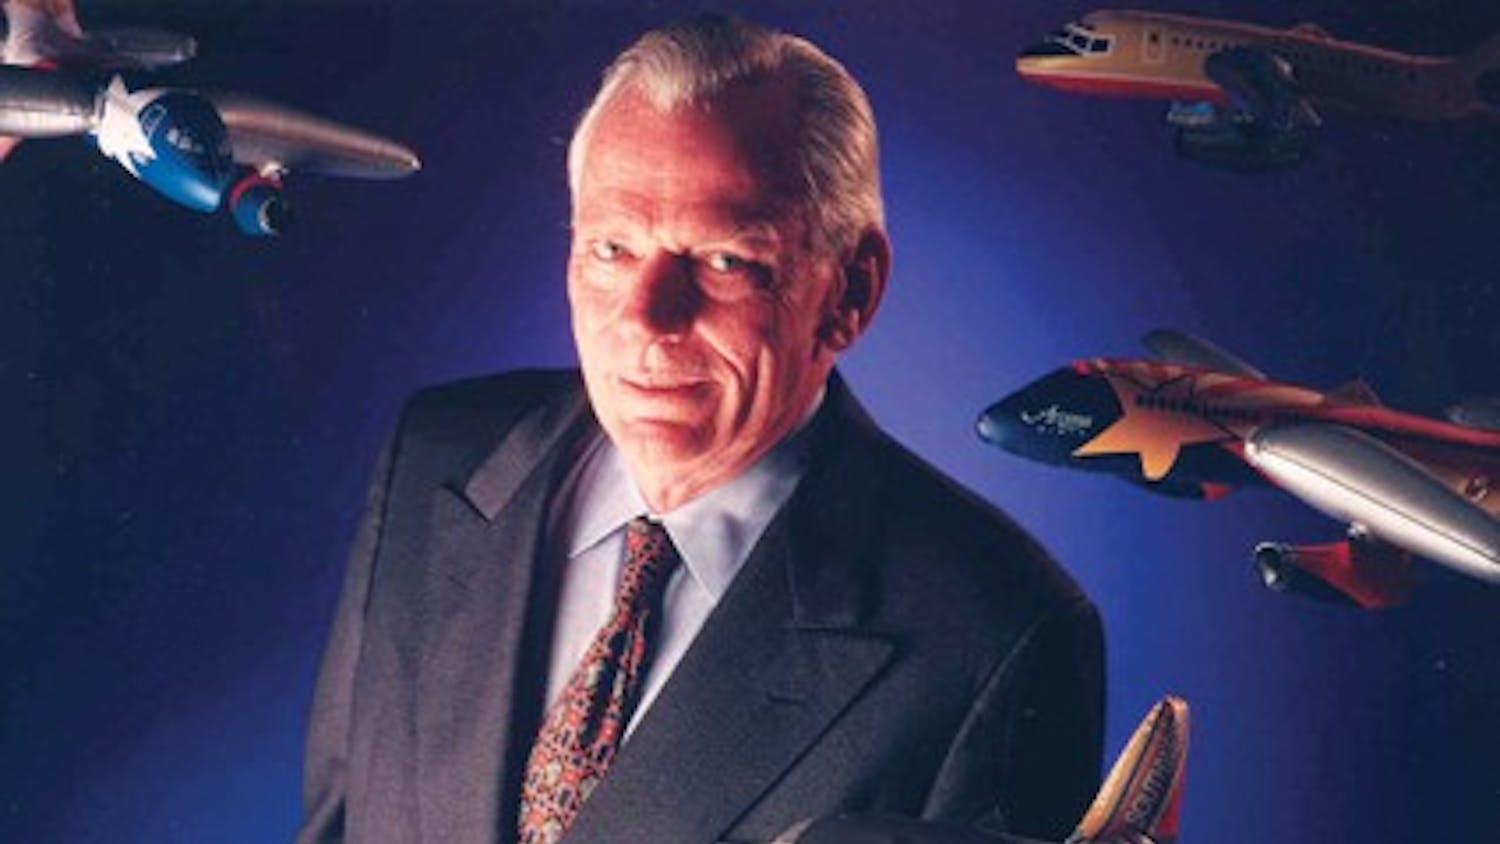 COURTESY PHOTO
Herb Kelleher, founder and executive chairman of Southwest Airlines, will speak today at the Kelley School of Business. The topic of his speech will be "Southwest  Airlines from the Chairman's View," and will cover his experiences and successes with the airline.